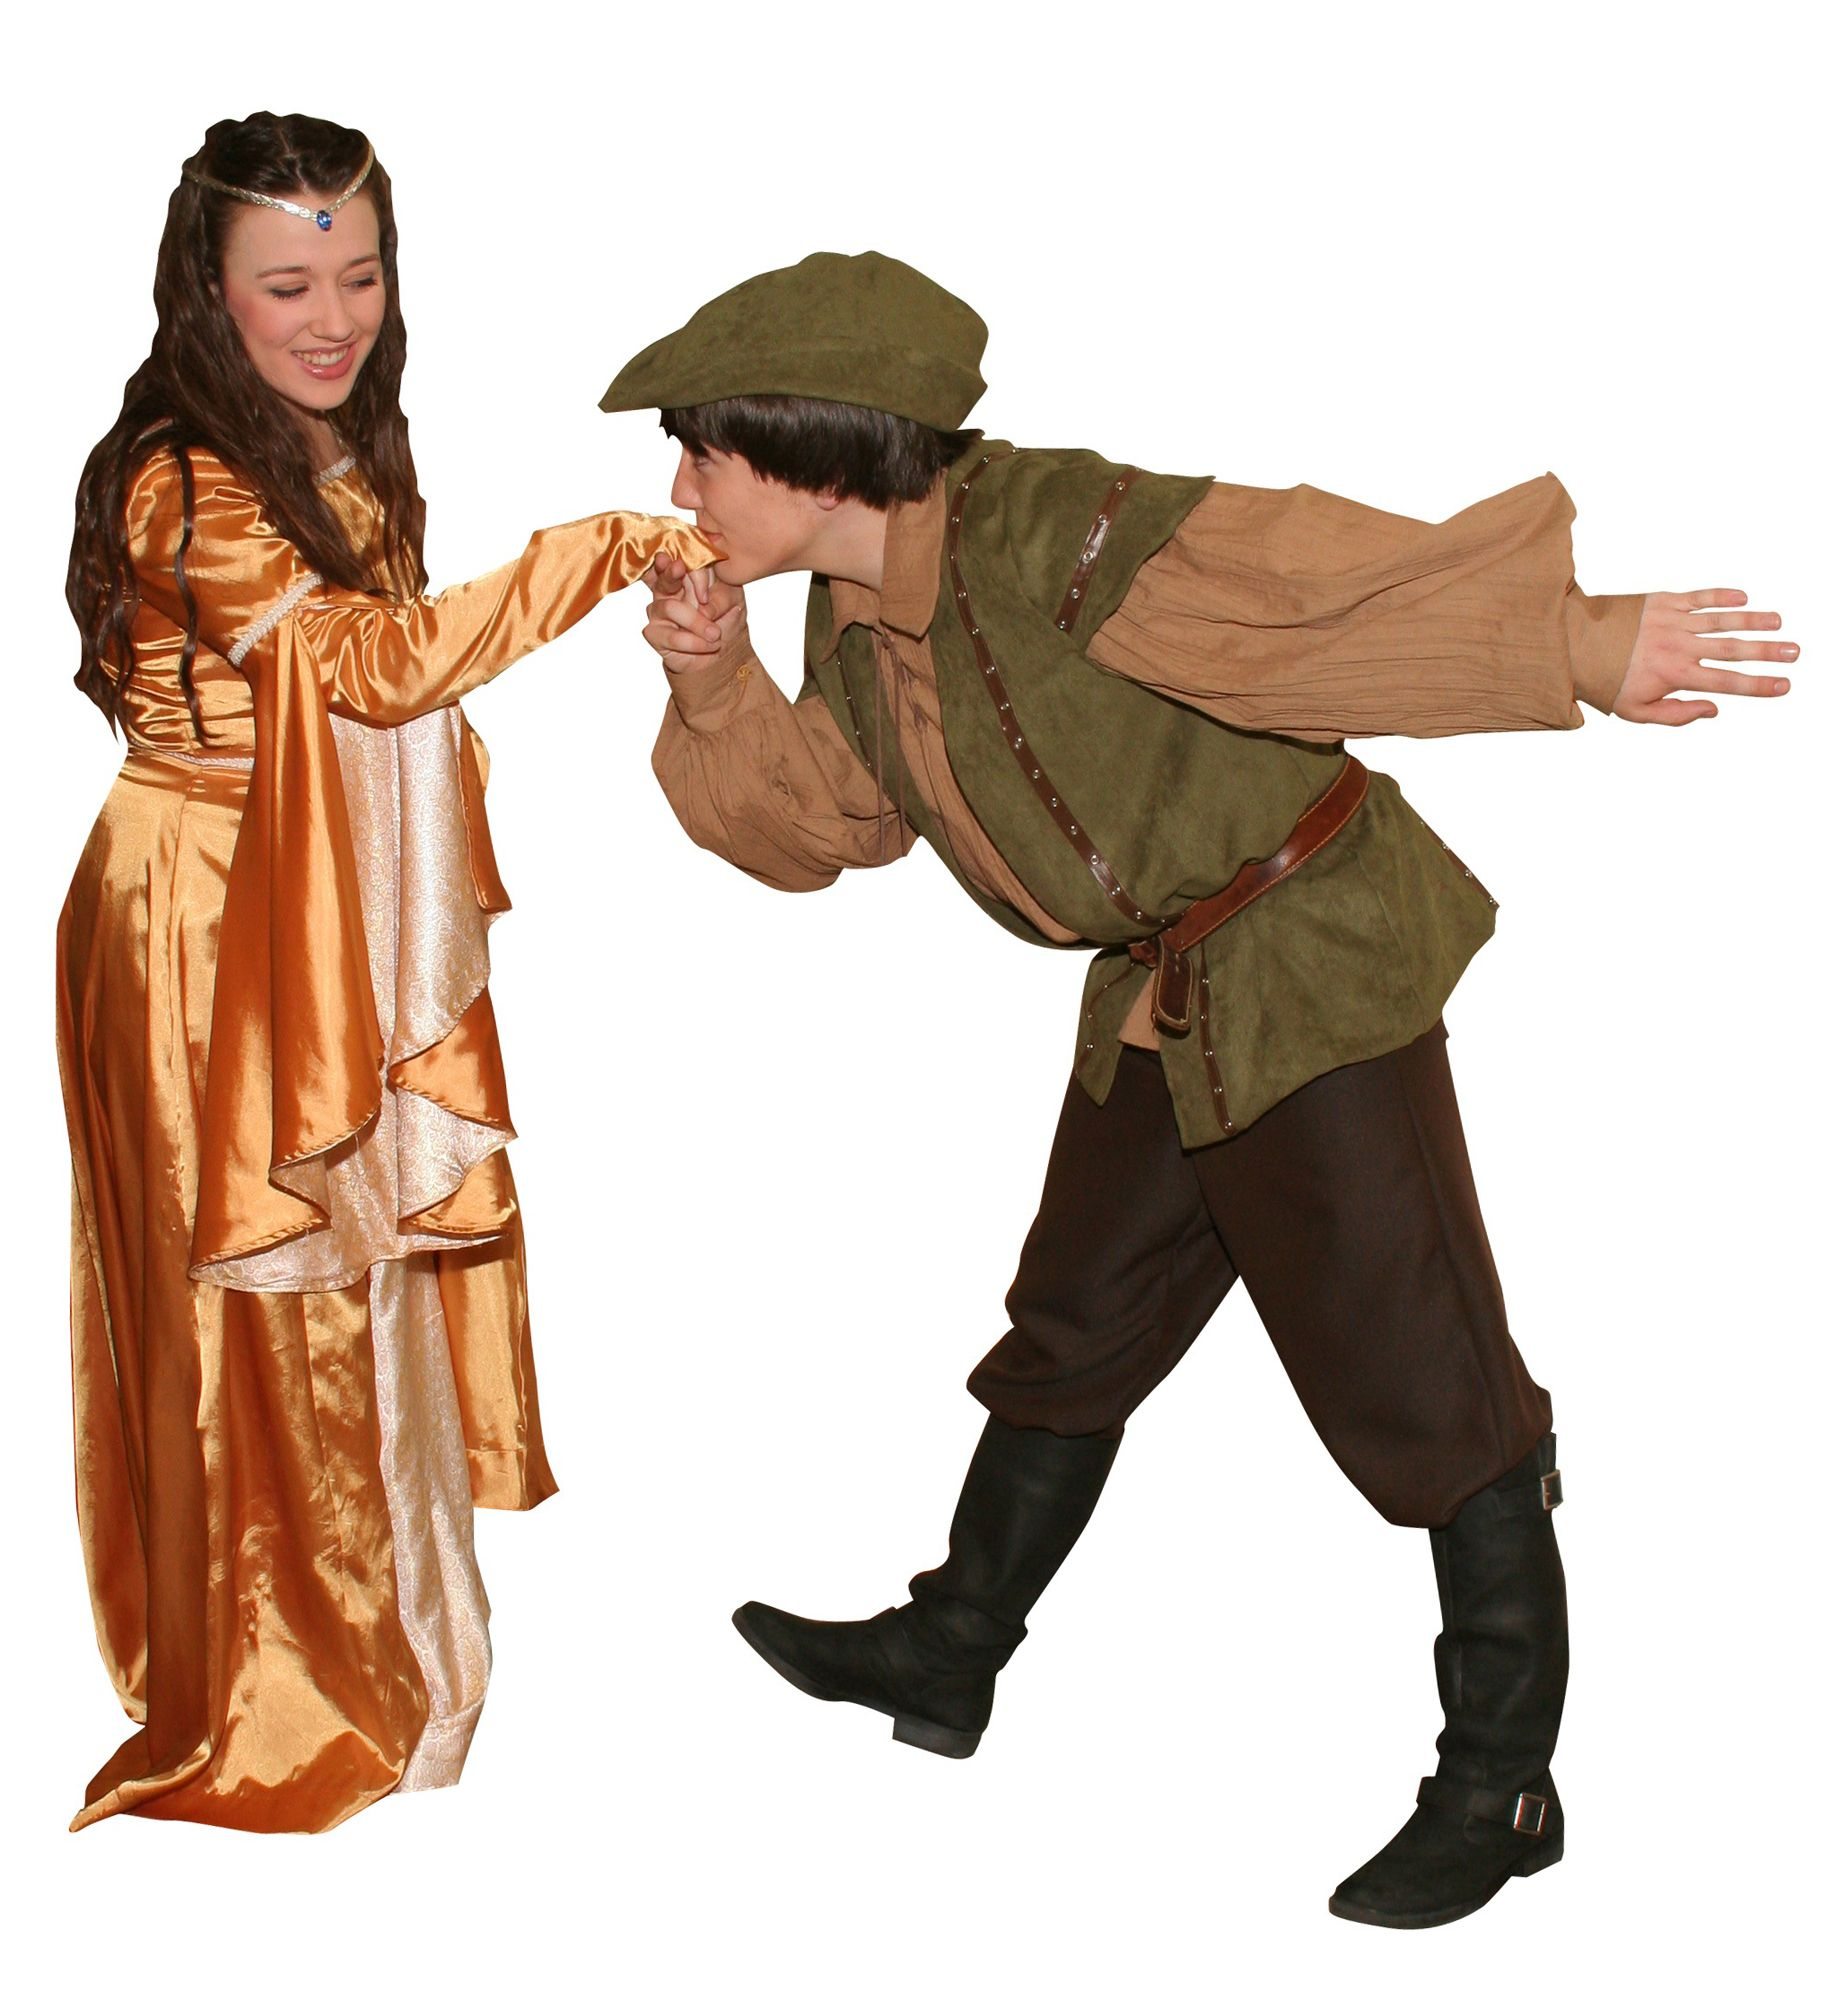 Christian Youth Theater presents &quot;Robin Hood&quot; May 27-June 5, 2011 at the Washburn Performing Arts Center in Washougal.